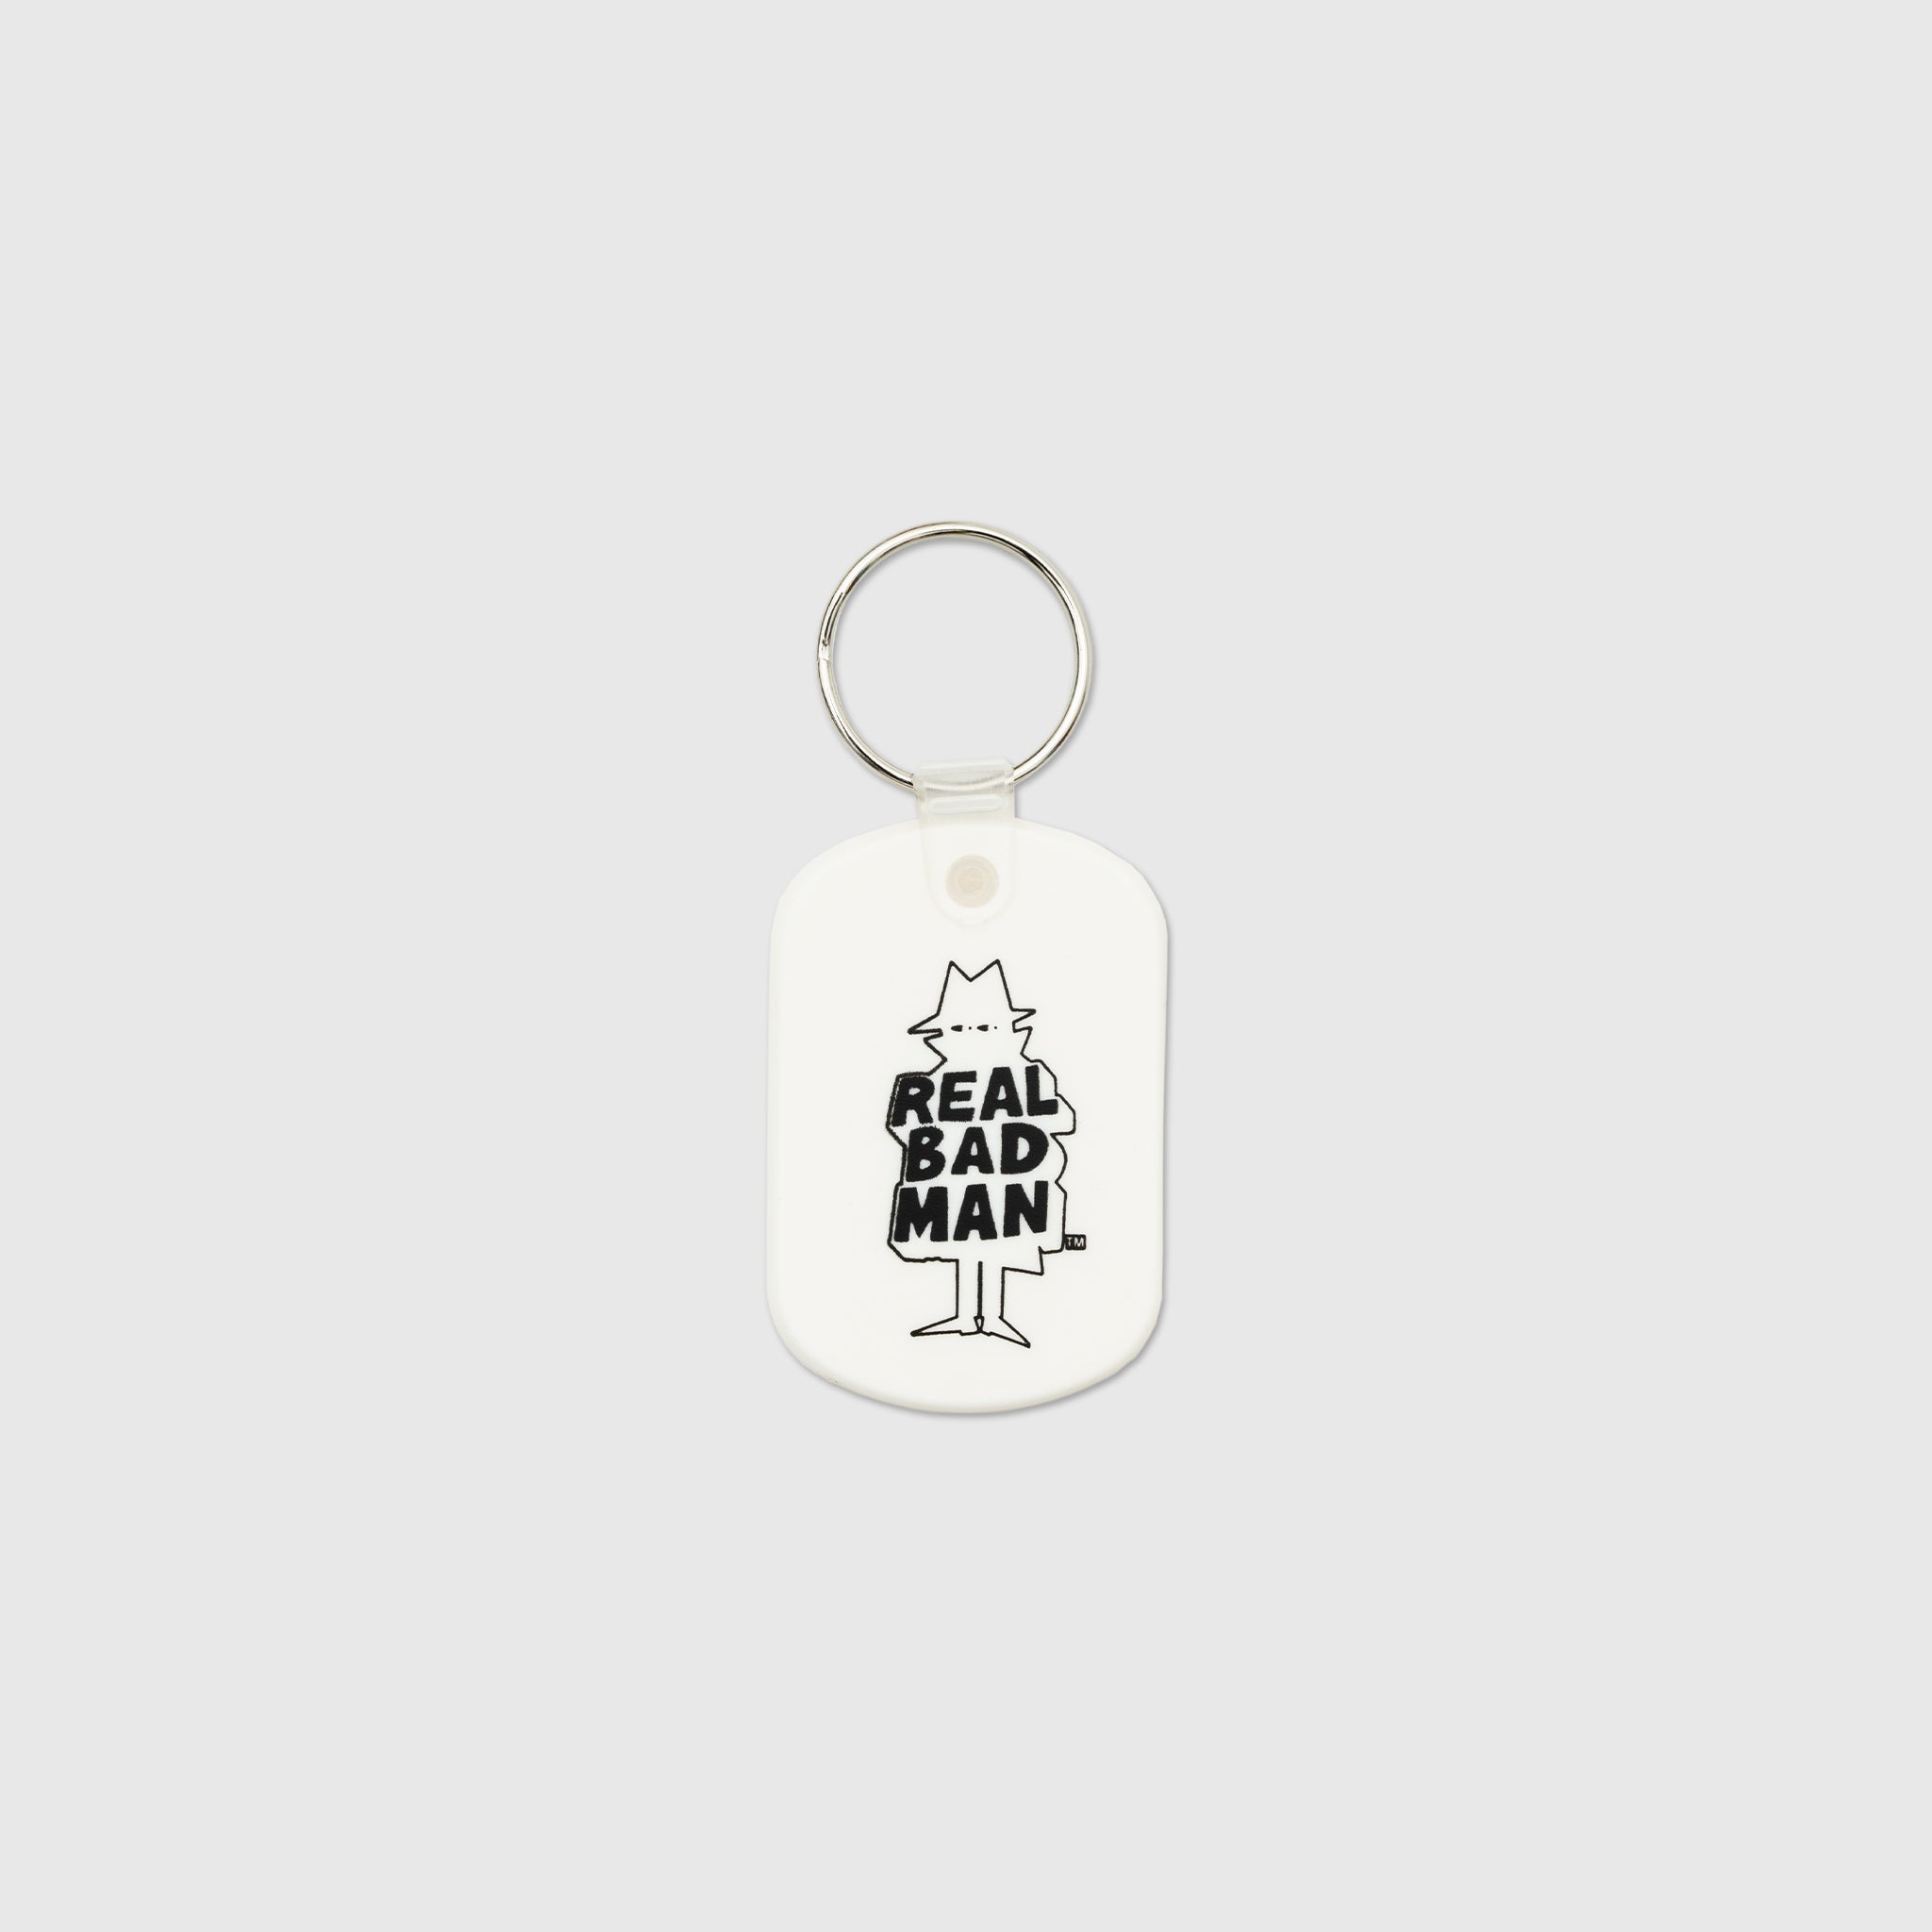 REAL BAD MAN GUEST KEY CHAIN